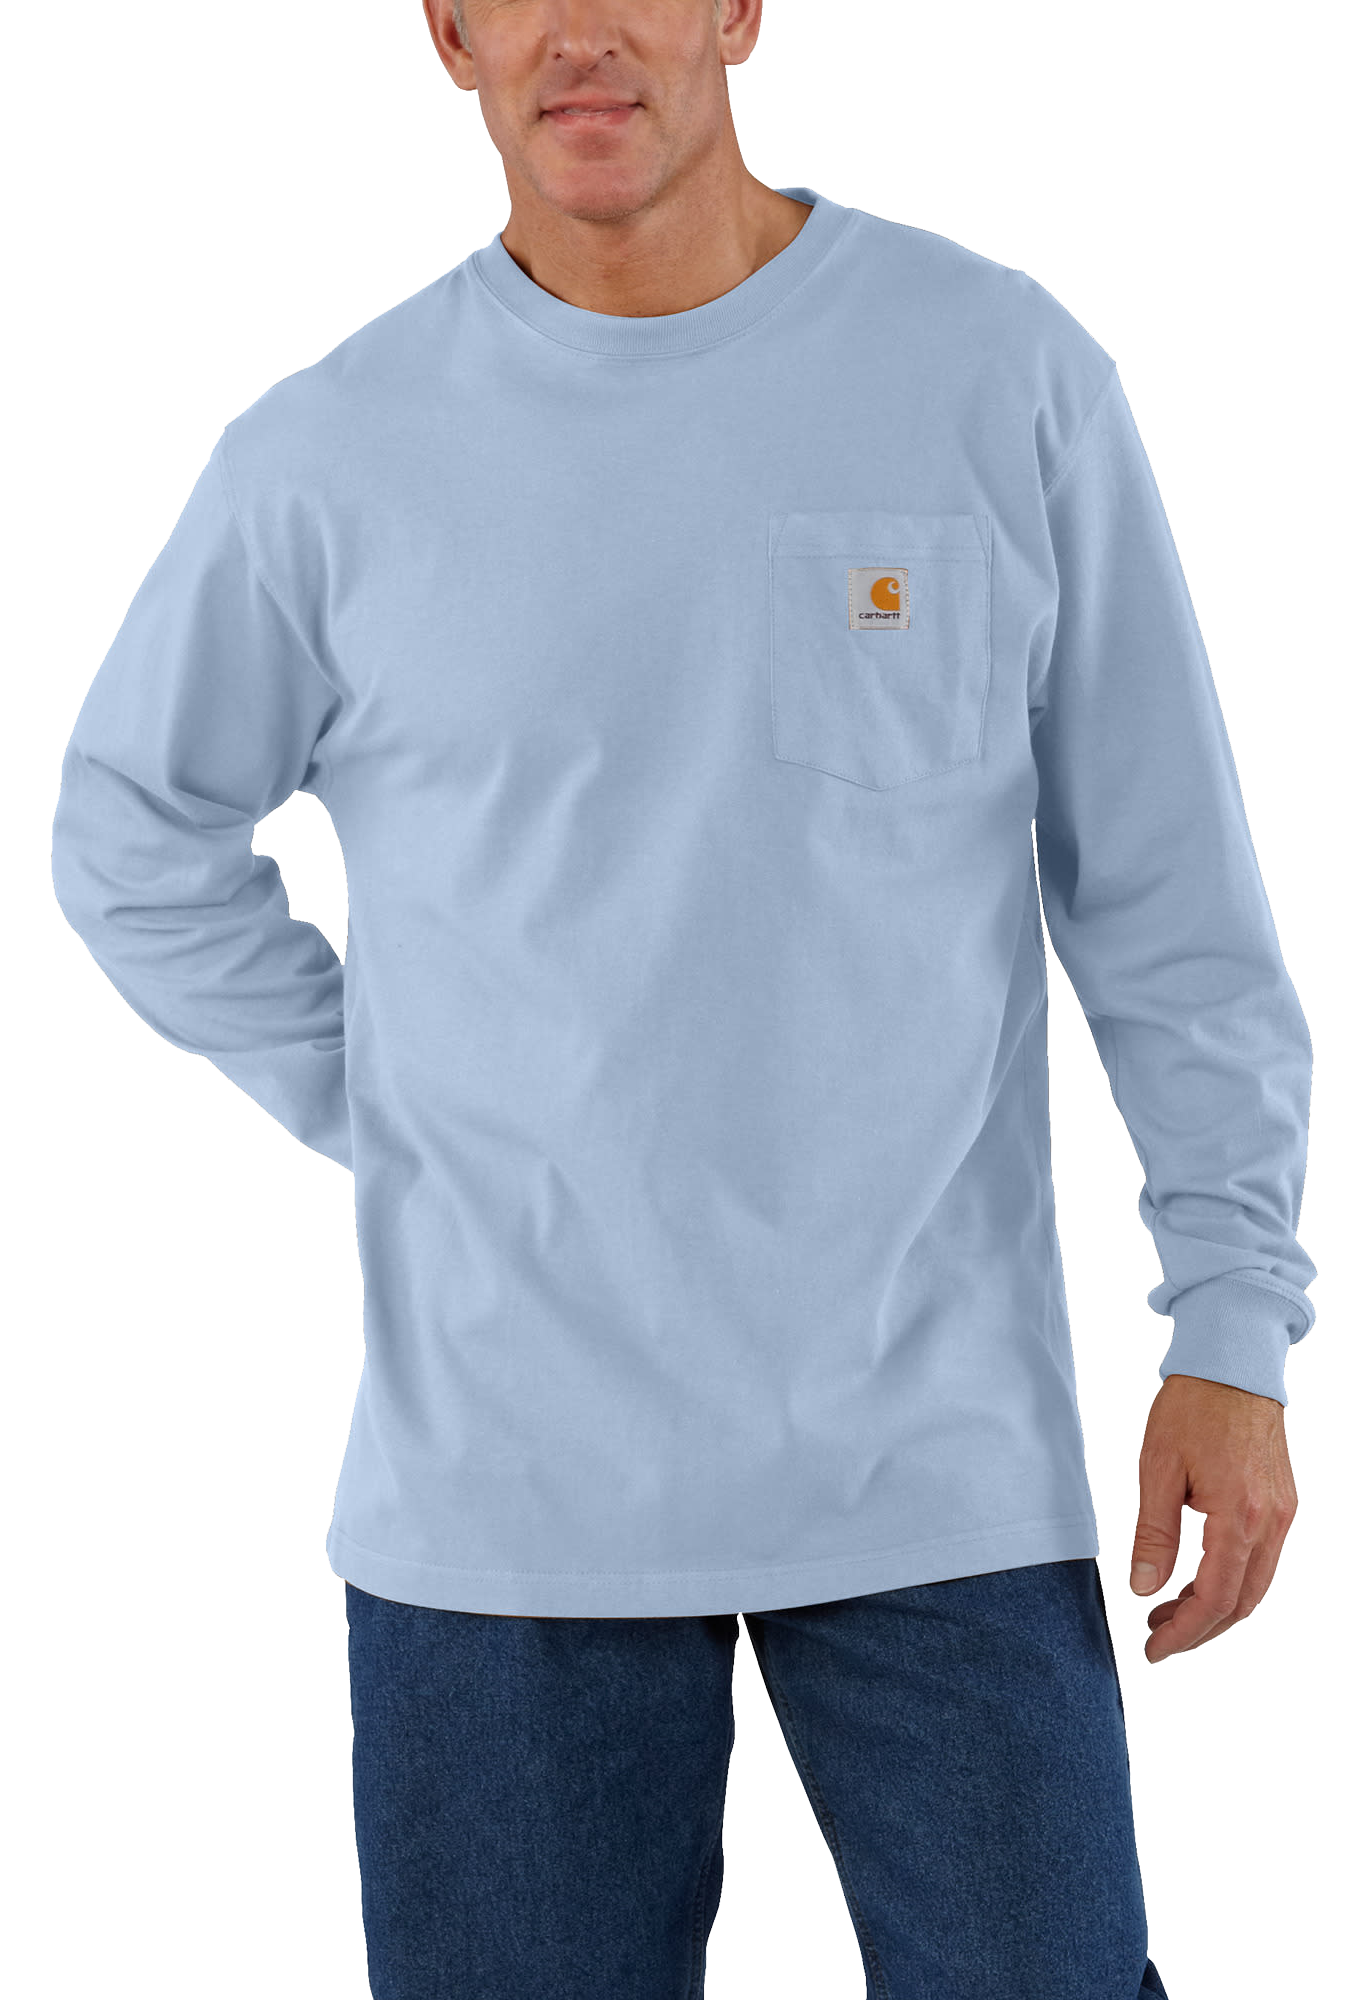 New! Carhartt Workwear Loose-Fit Long-Sleeve Pocket T-Shirt for Men